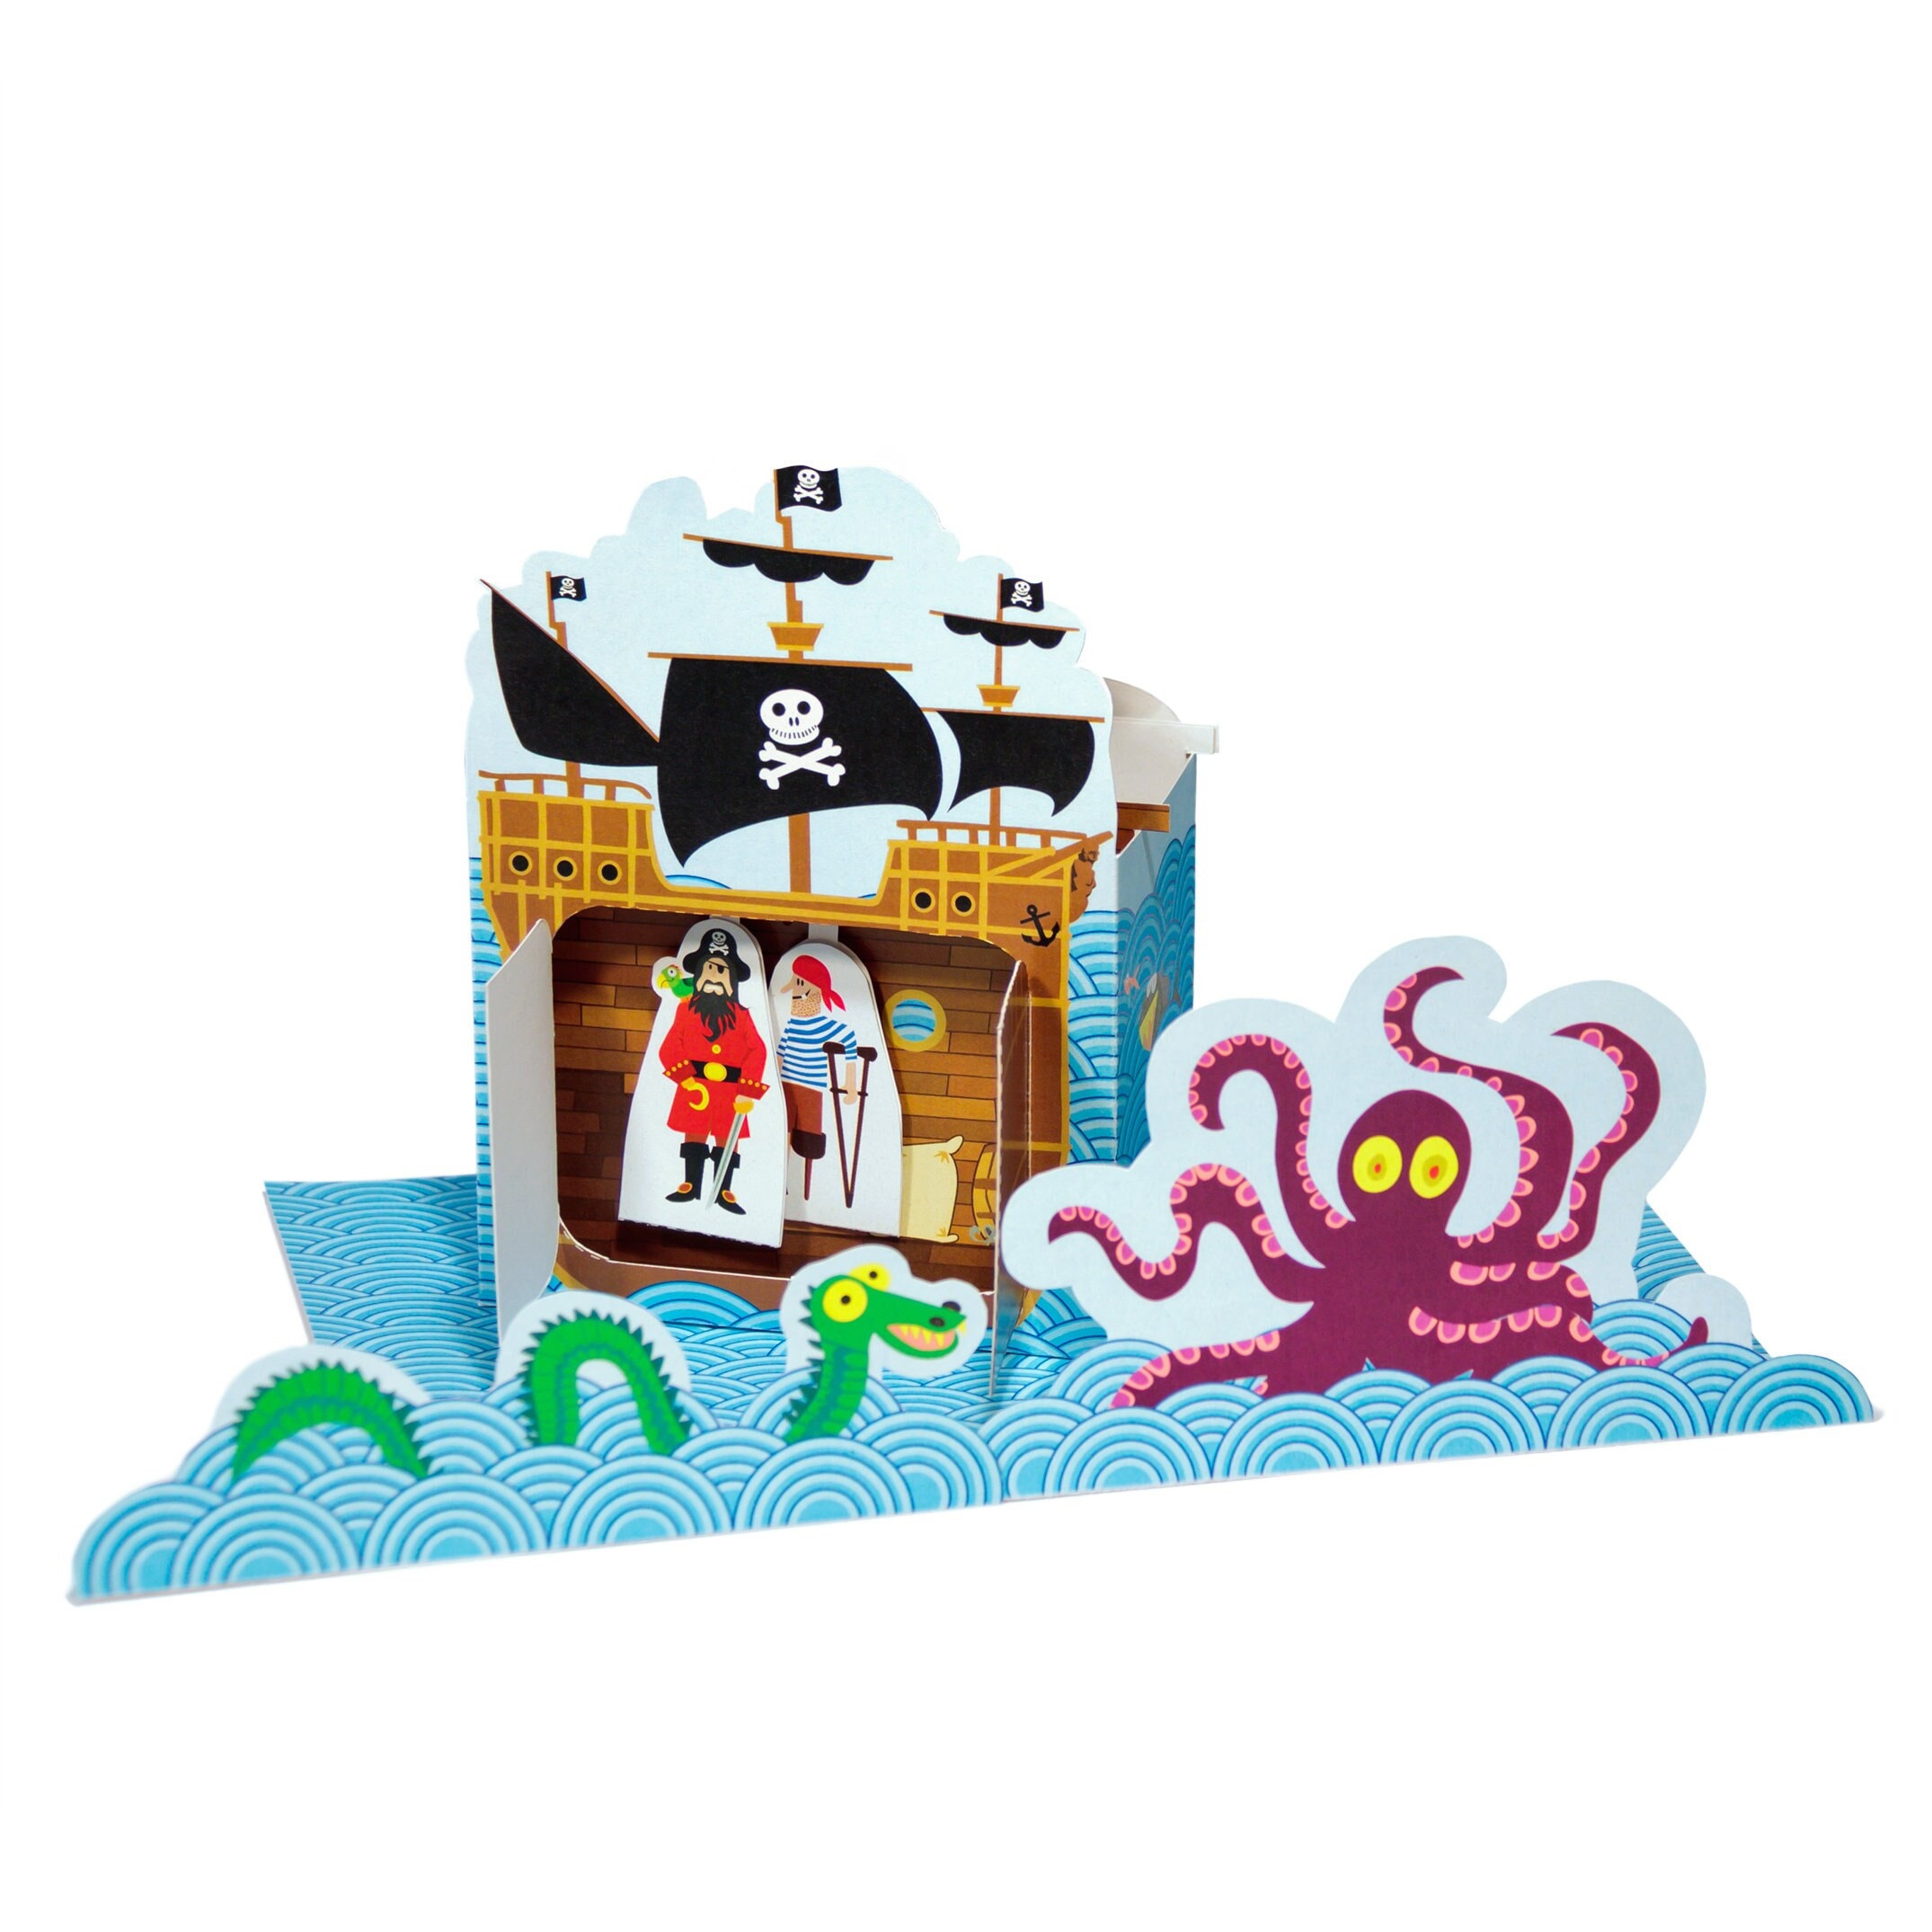 Pirates Paper Theater Diy Paper Craft Kit Puppets Paper Etsy